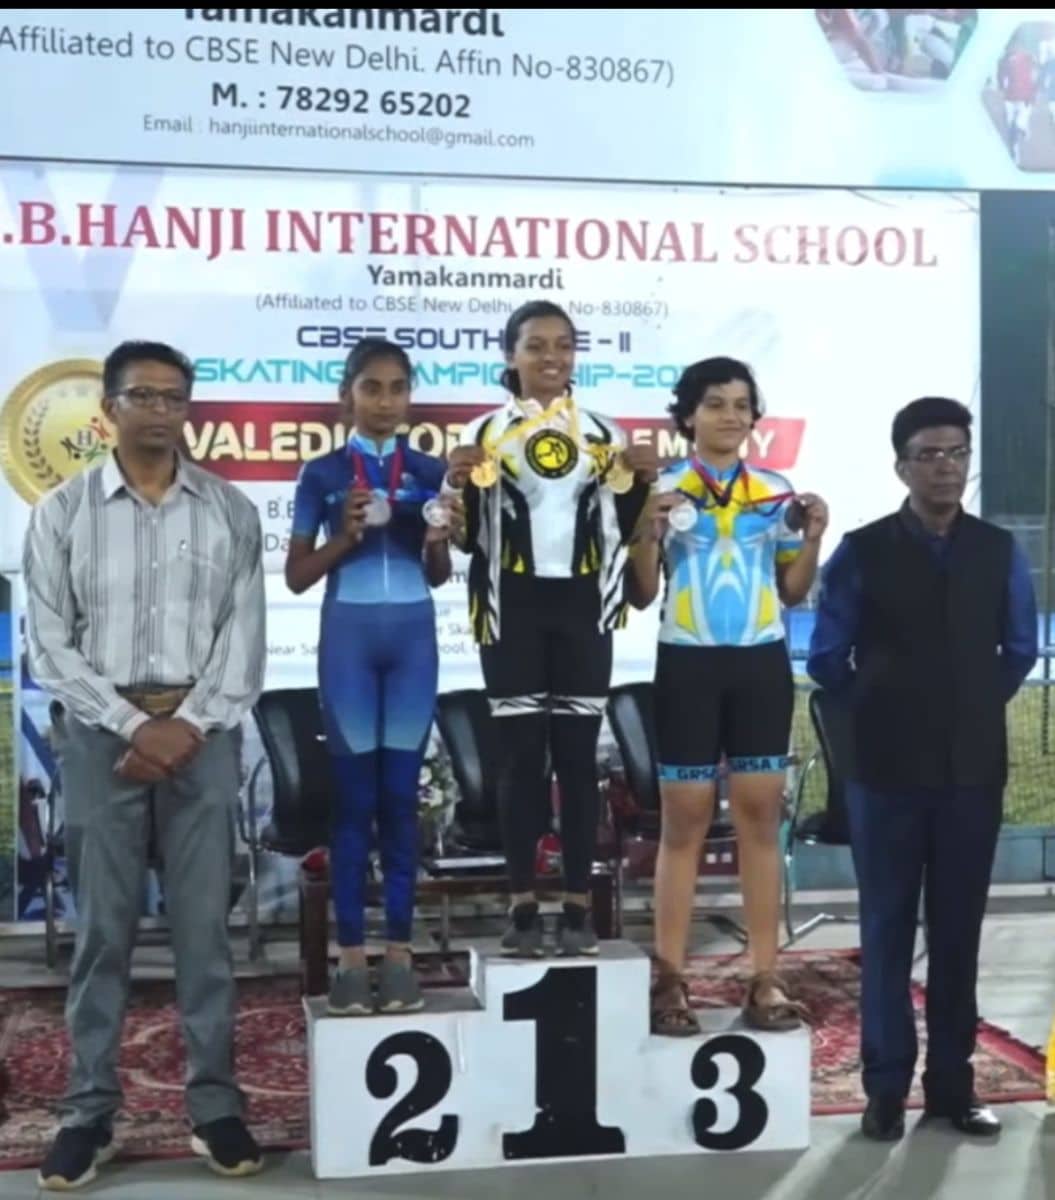 In the CBSE South Zone Skating Competition, Jesnia Correa wins two gold medals